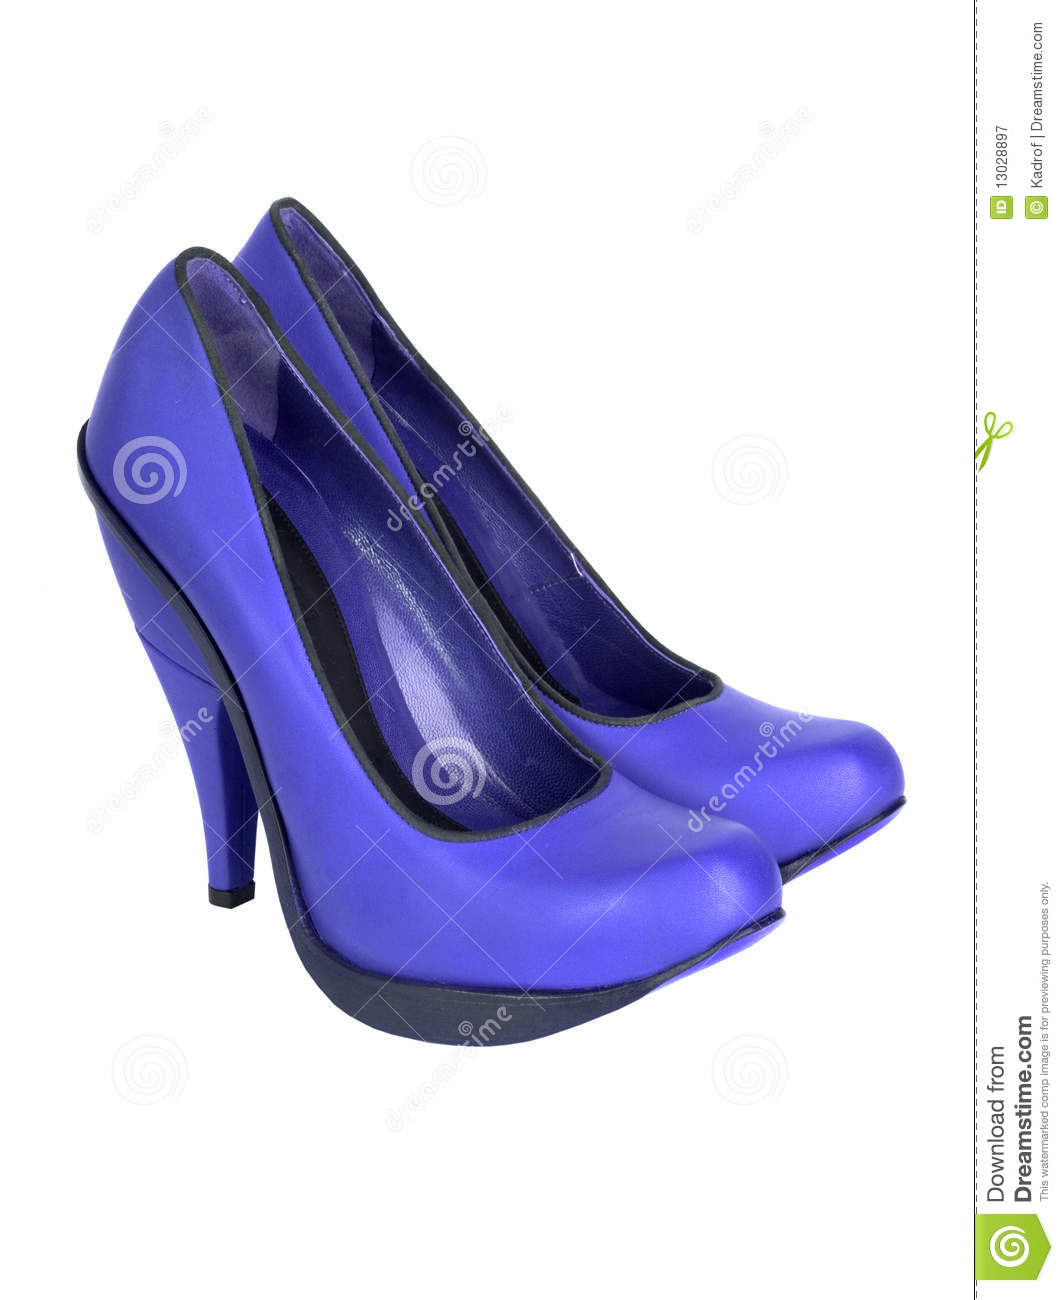 Blue High Heel Women Shoes Royalty Free Stock Photography   Image